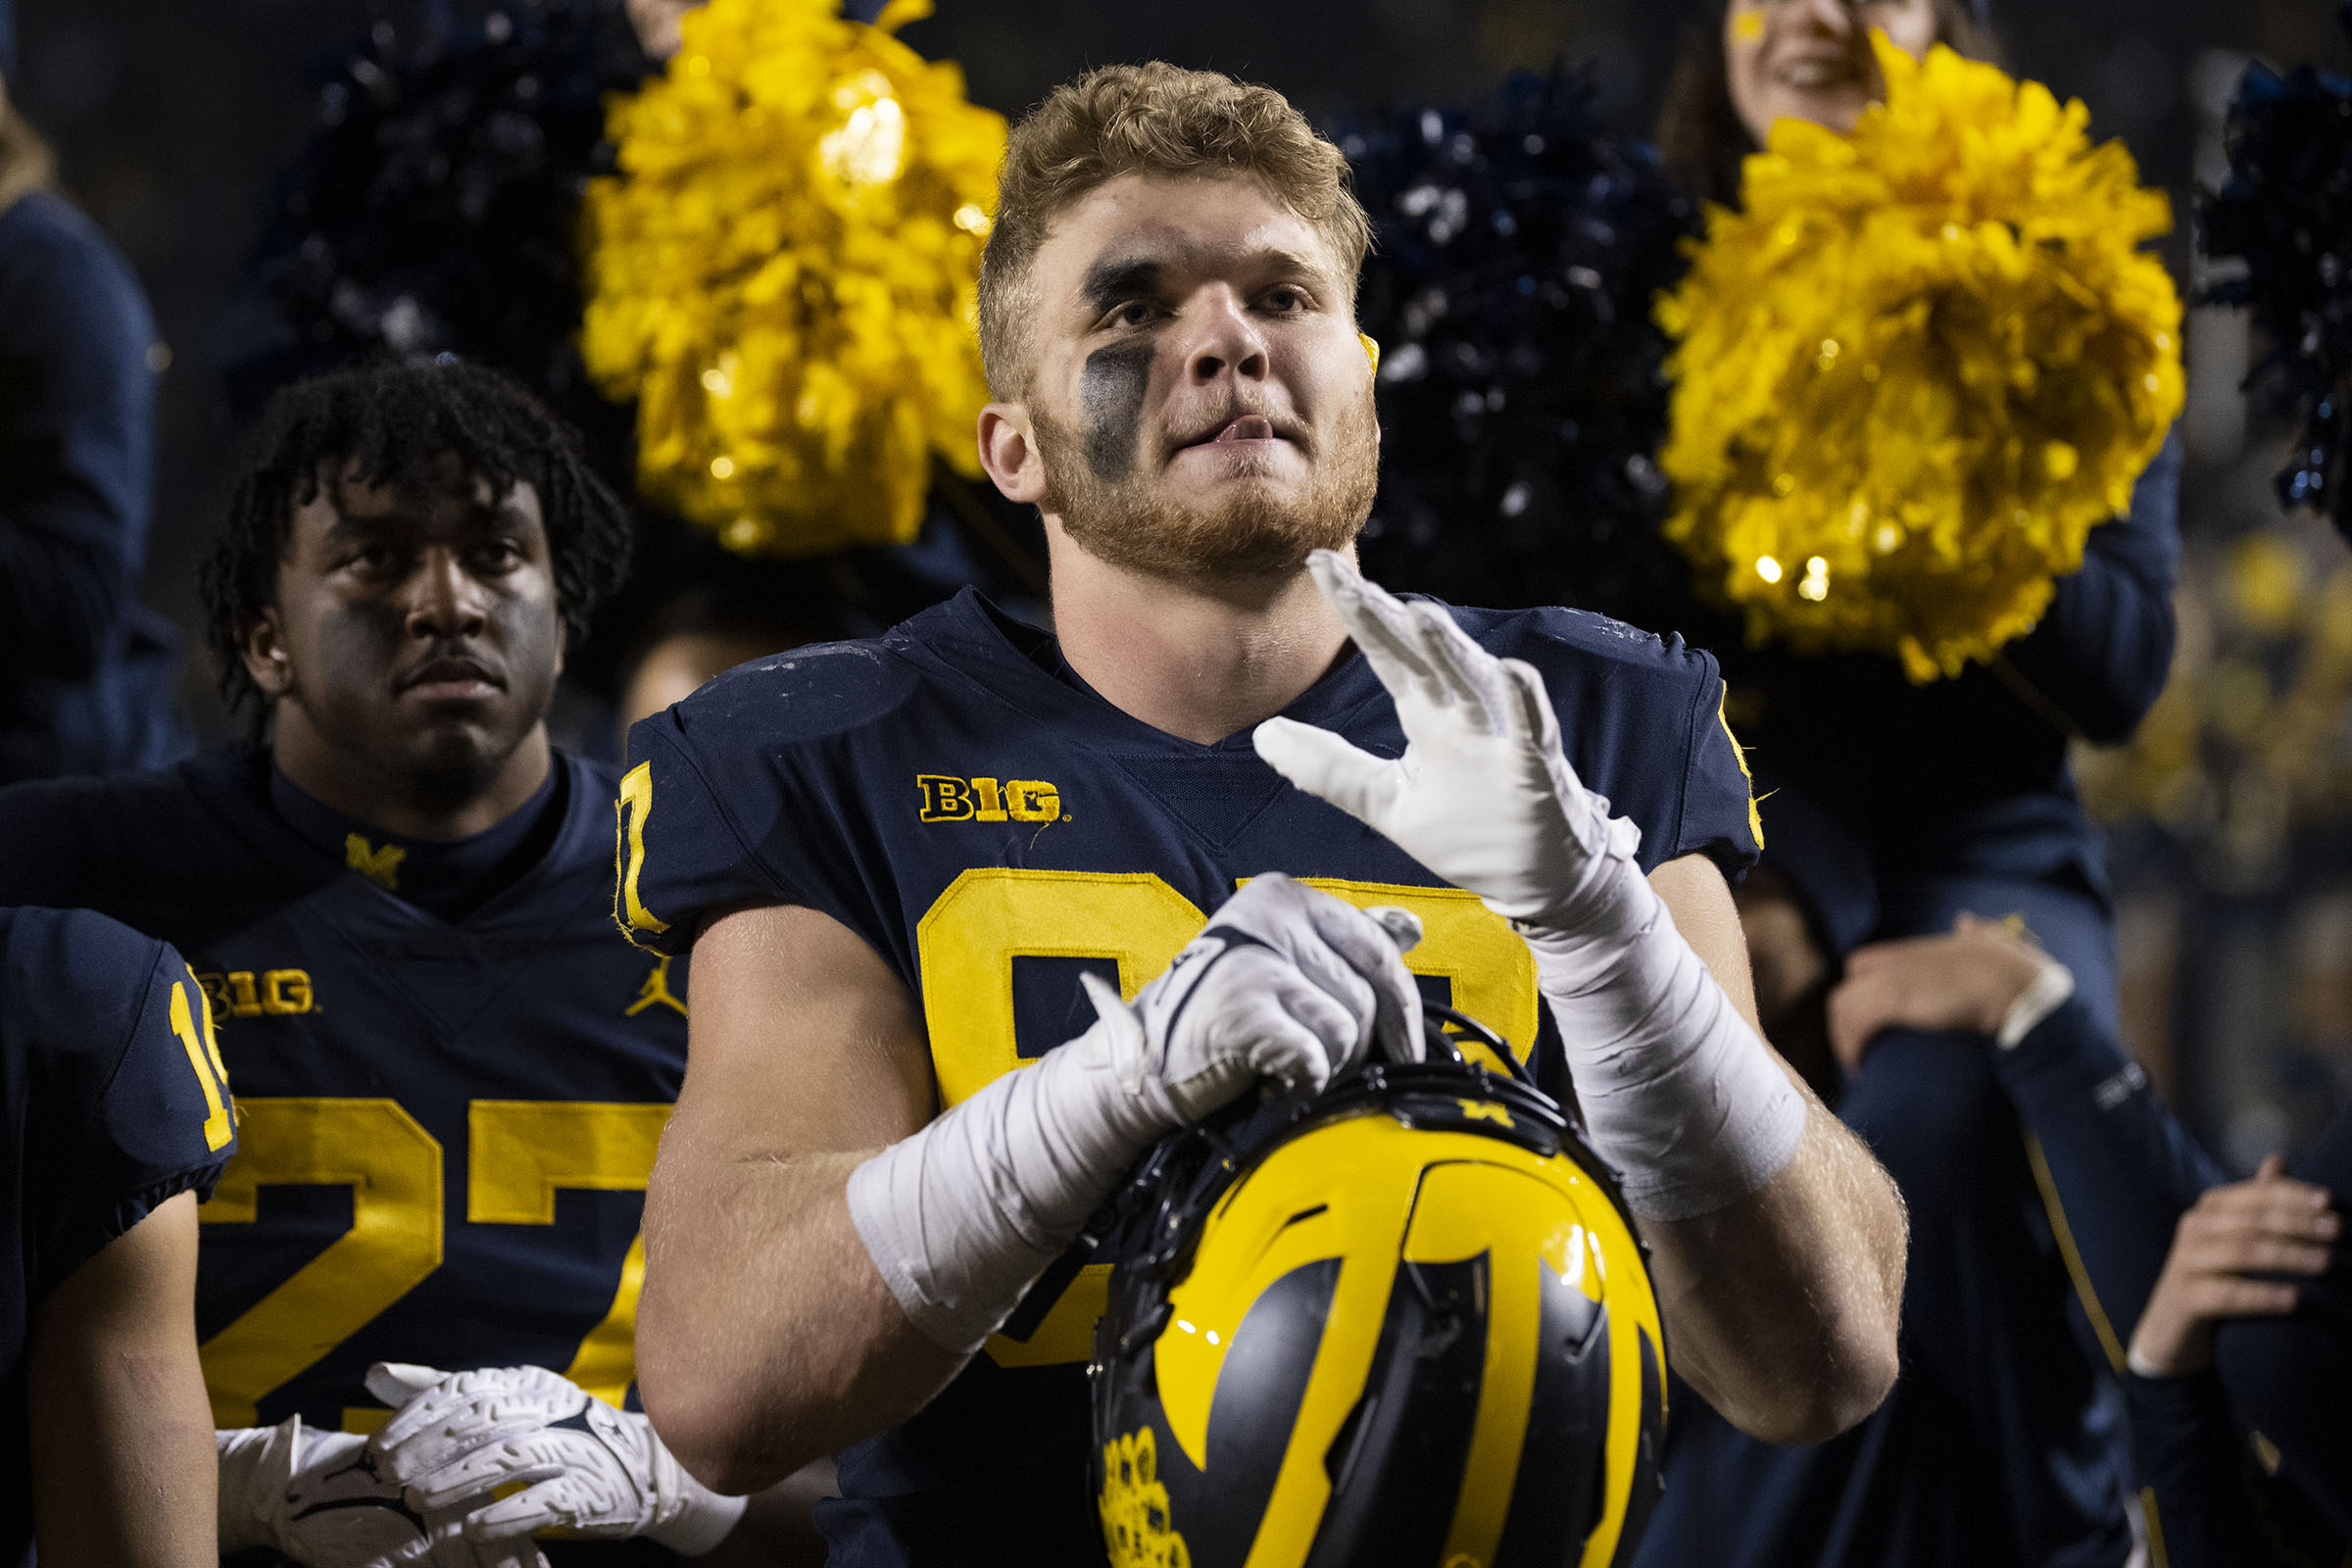 Michigan football's Aidan Hutchinson and a relentless pursuit of greatness